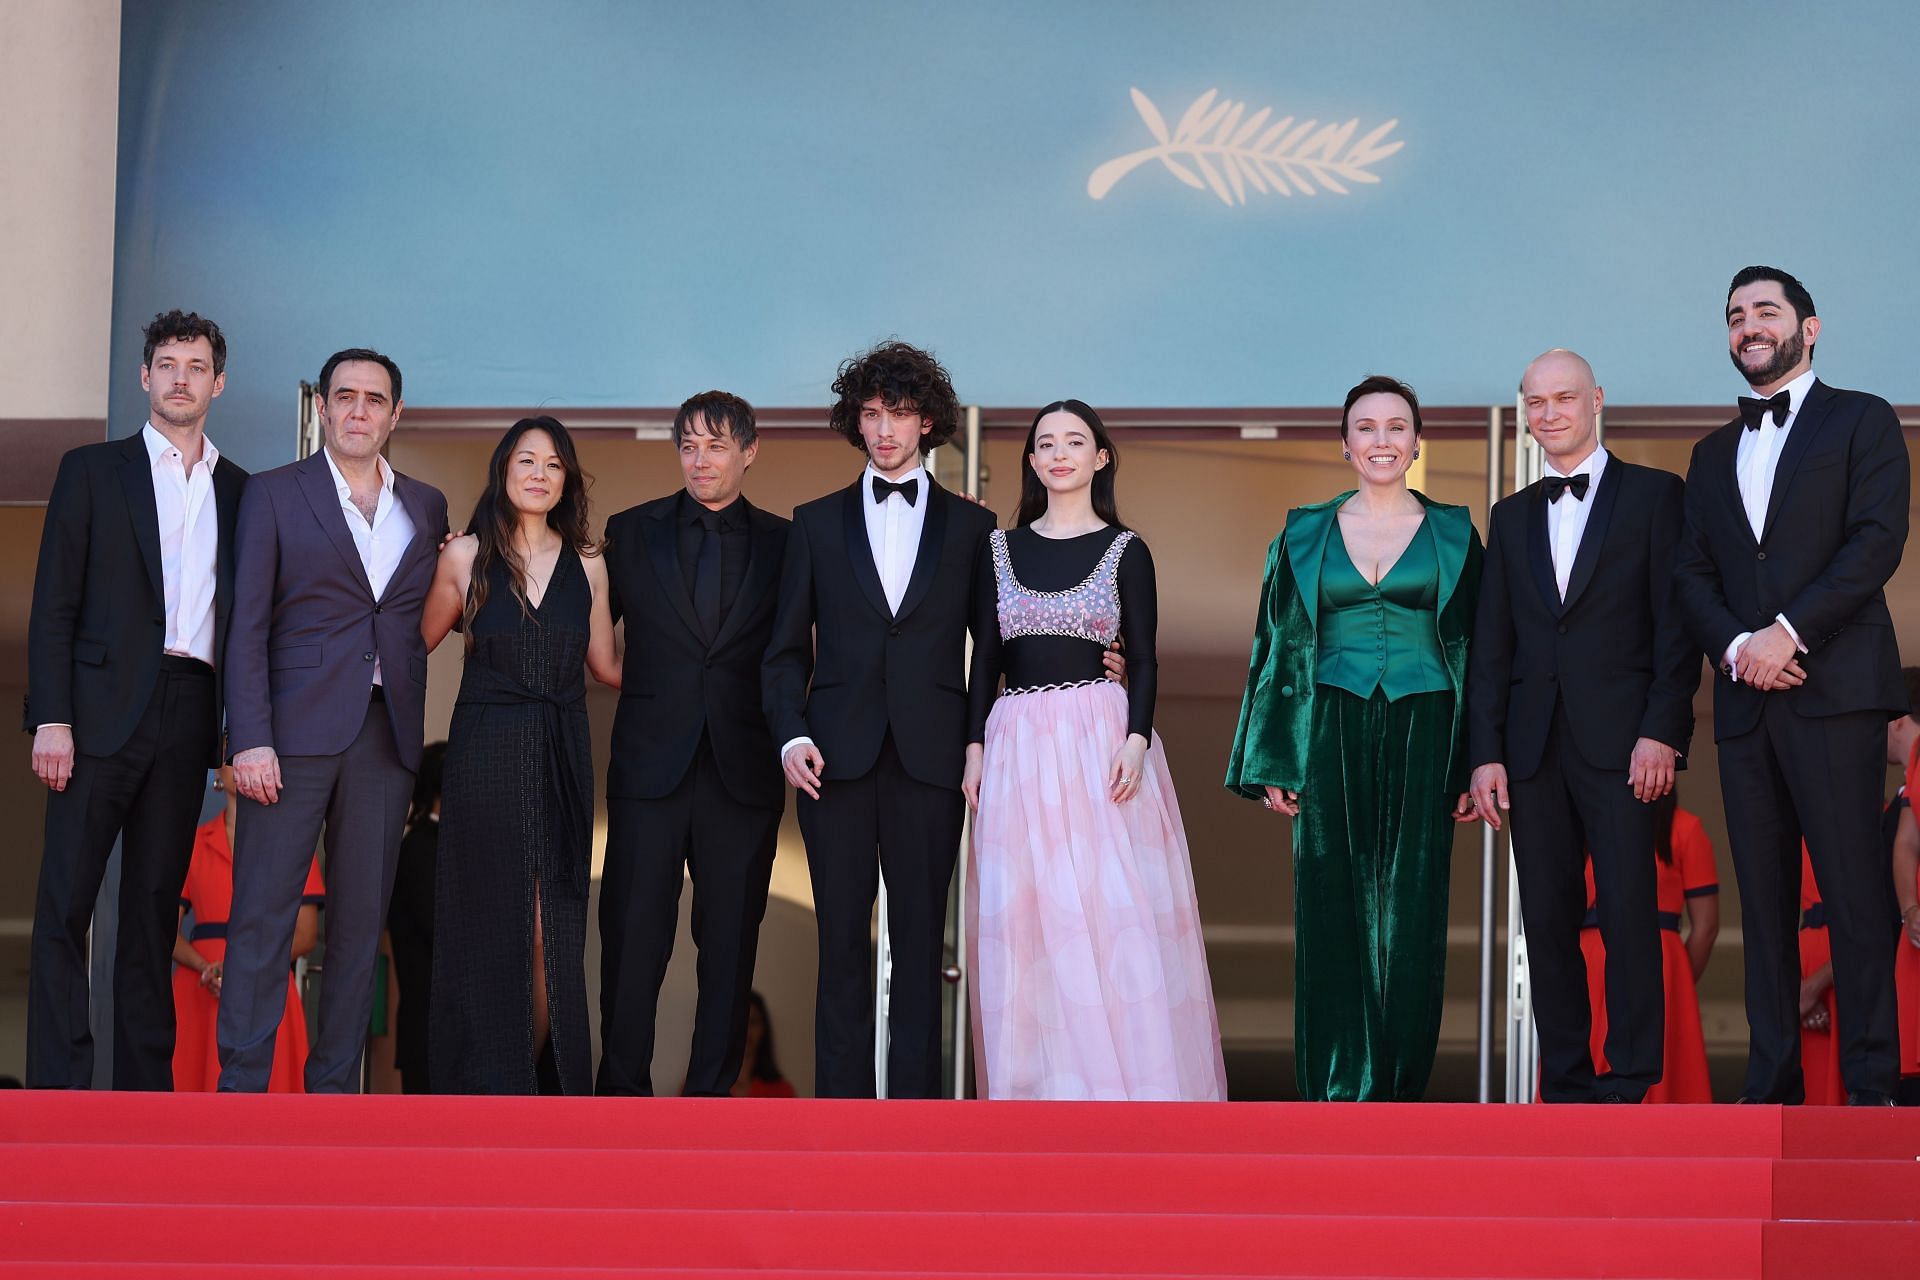 Anora cast at Cannes Film Festival (Image via Cindy Ord/Getty Images)